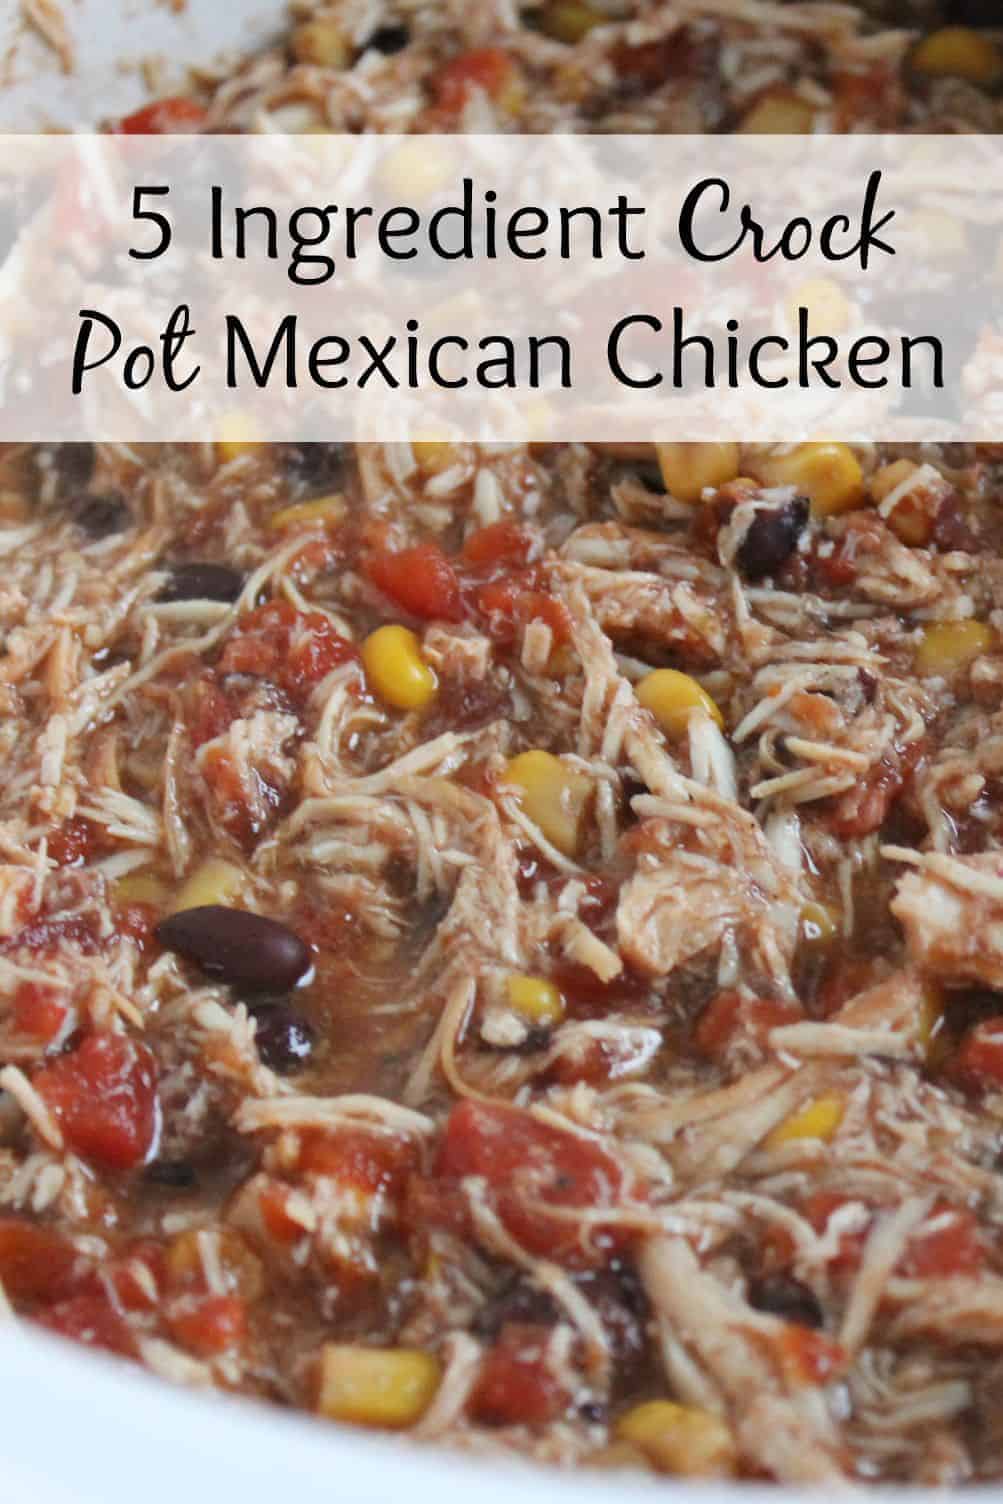 This Mexican chicken is one of the best easy crockpot recipes!